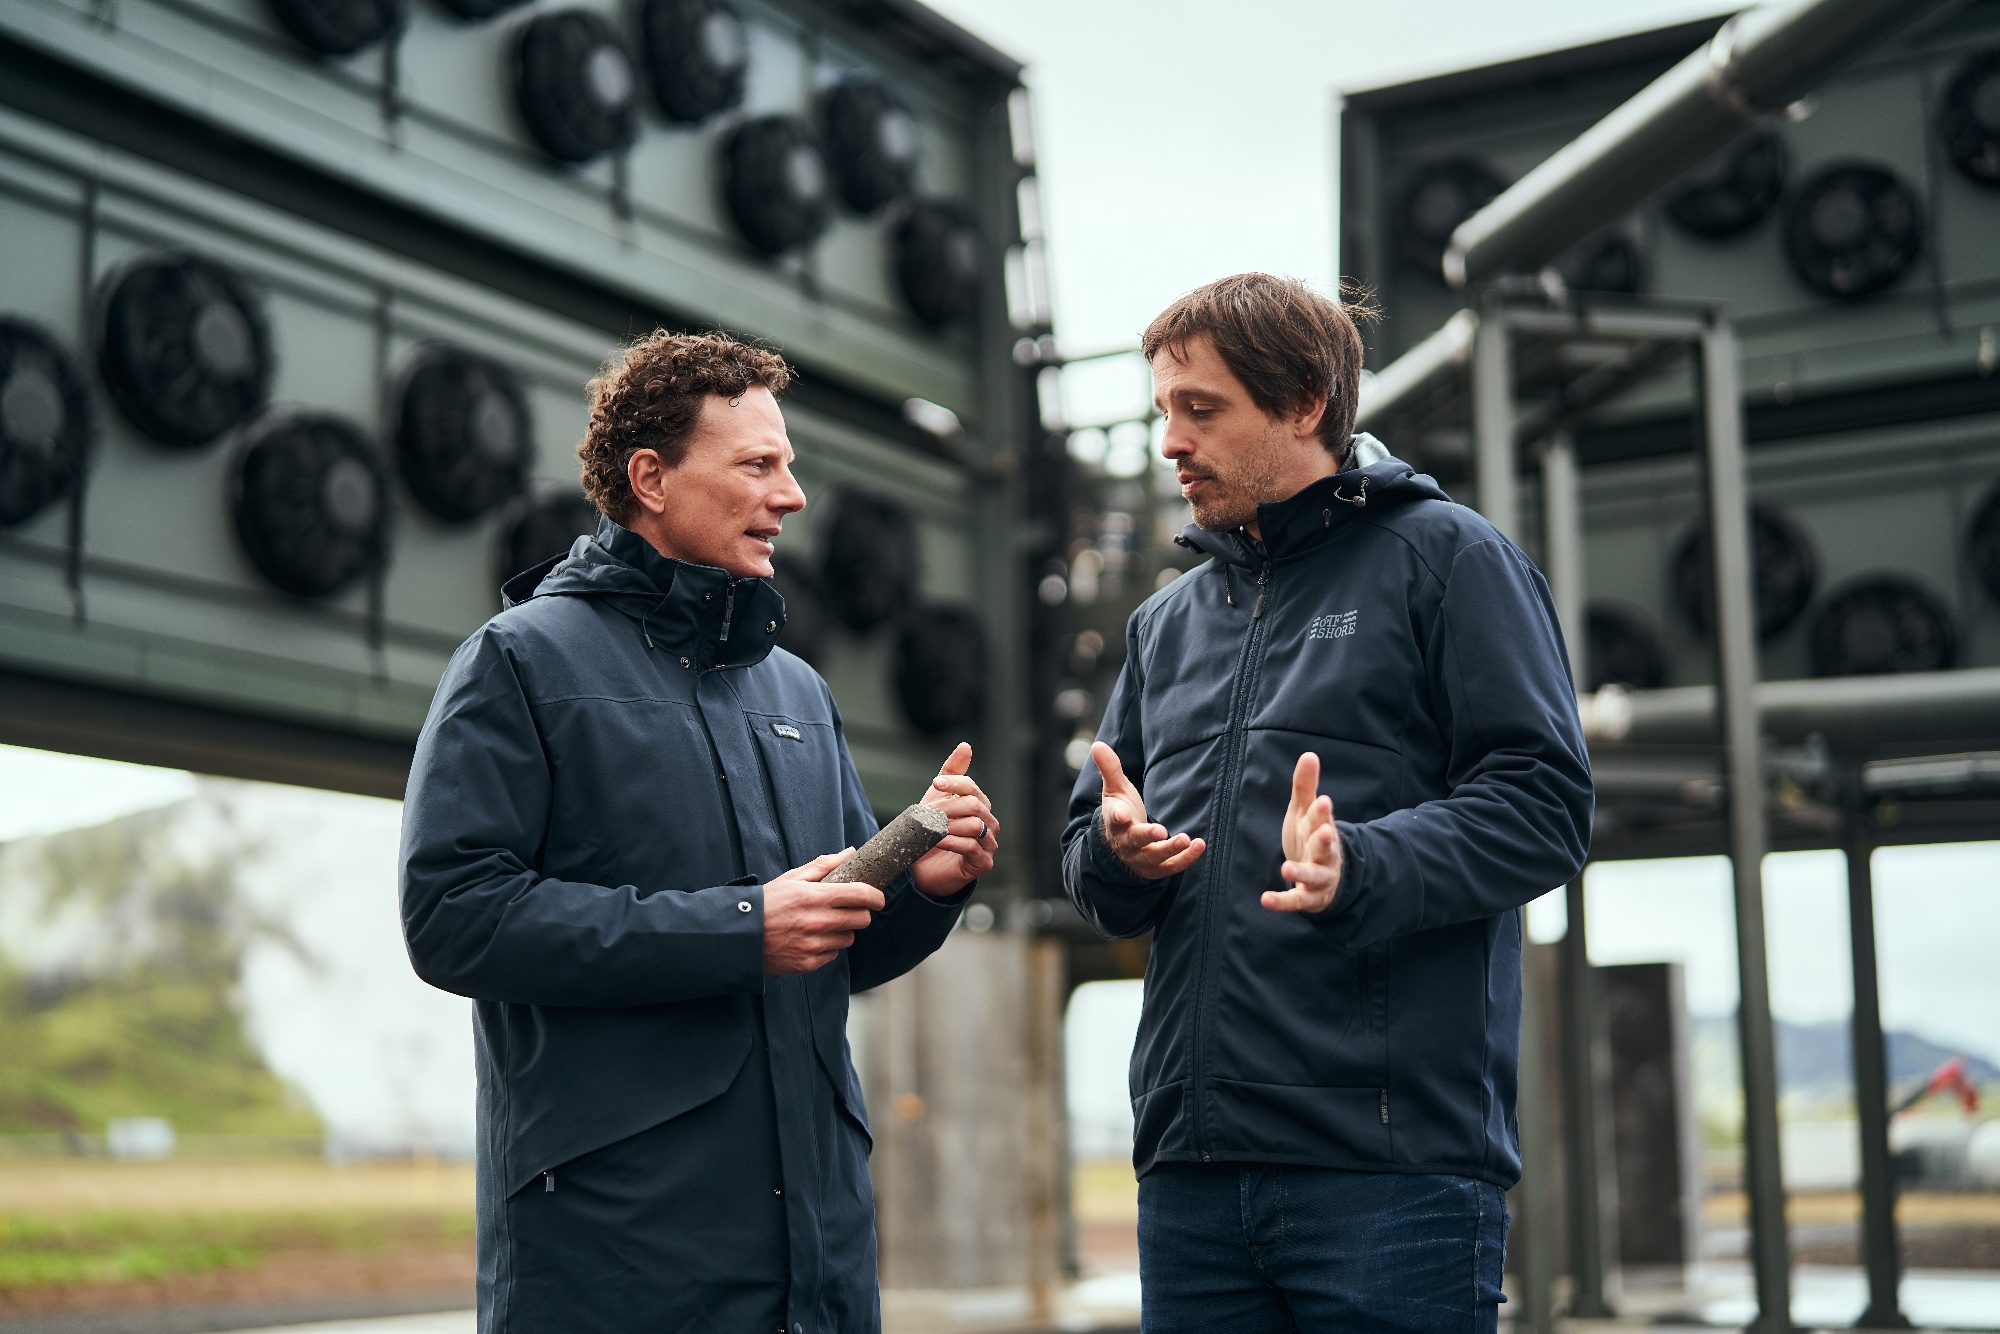 Climeworks Orca plant in Iceland with founders C.Gebald and J.Wurzbacher, Image 10, Copyright Climeworks